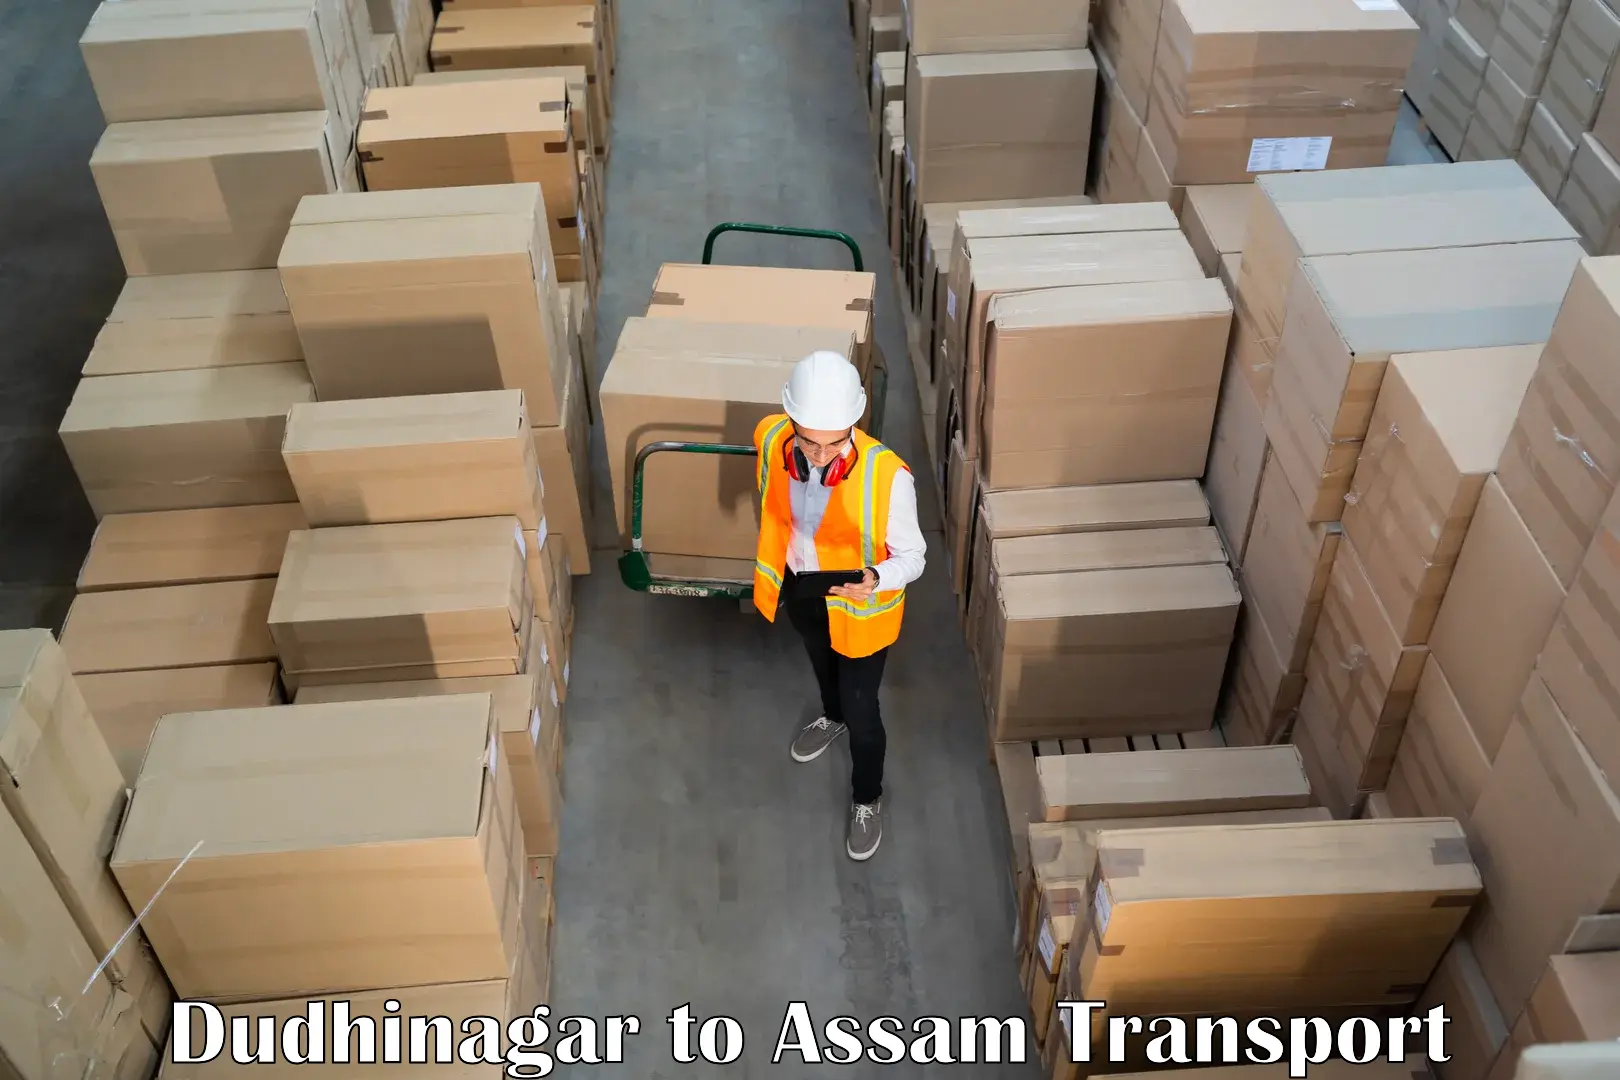 Goods transport services in Dudhinagar to Baihata